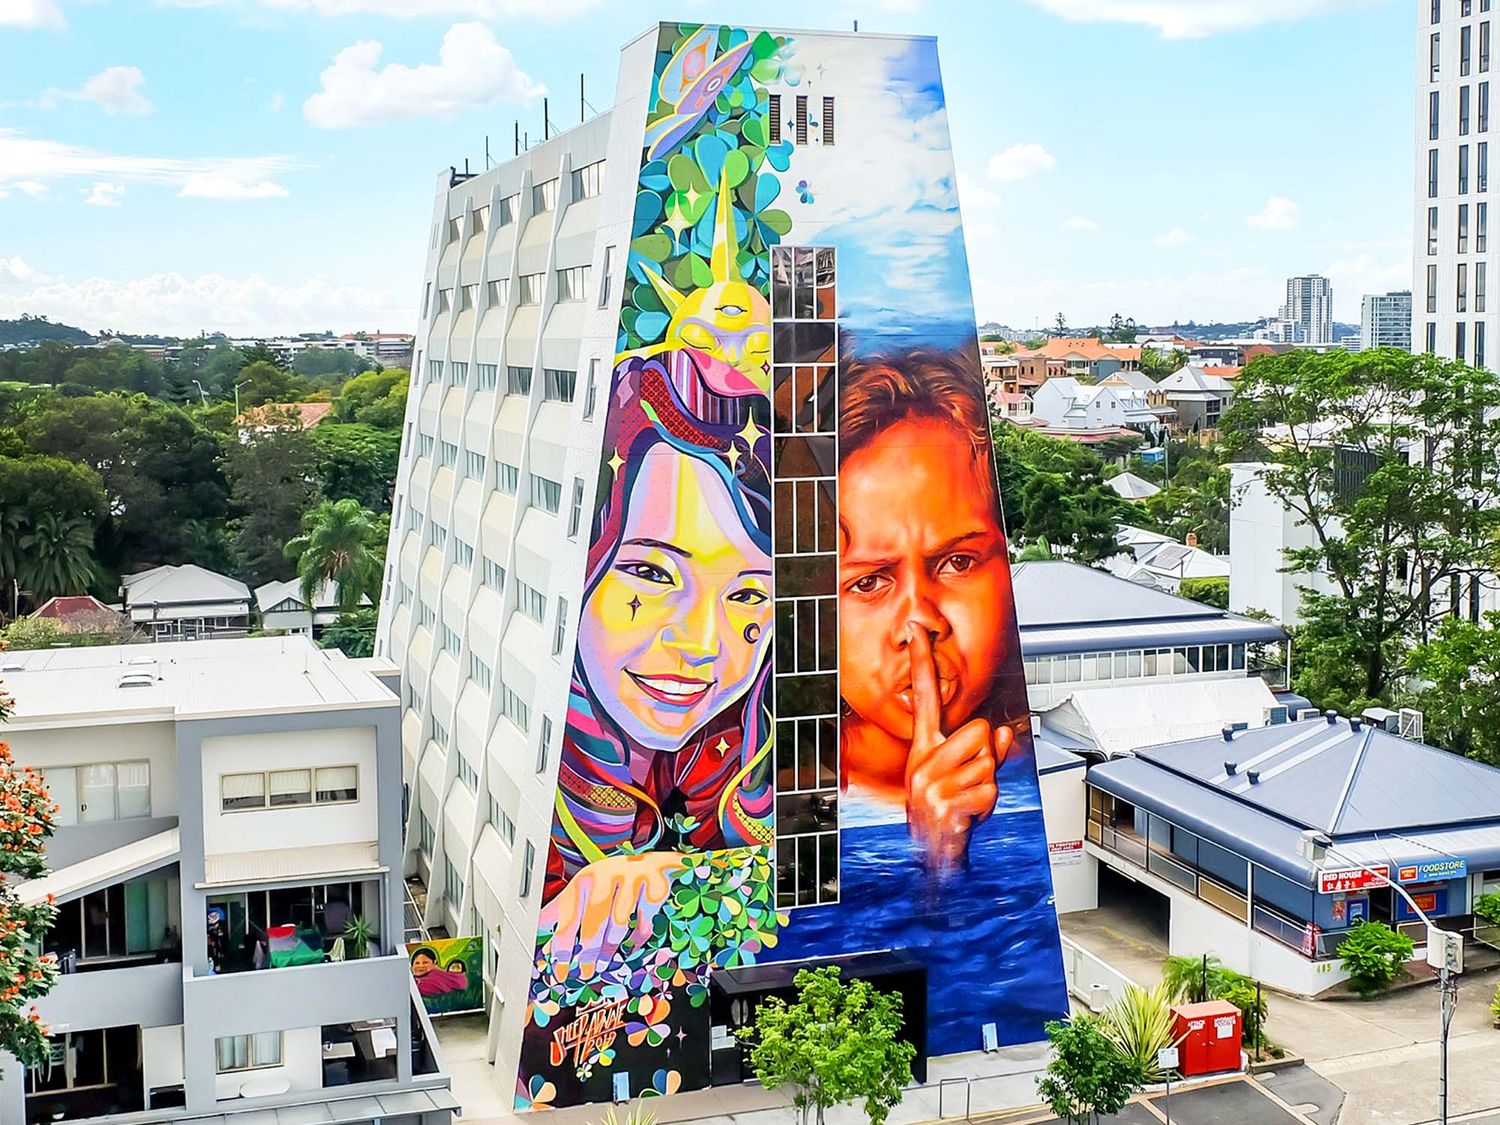 For almost 10 years now, the Brisbane Street Art Festival has been transforming the city with XXL murals and other initiatives to promote emerging artists (©IES / @ Sheep Shen + Matt Adnate).